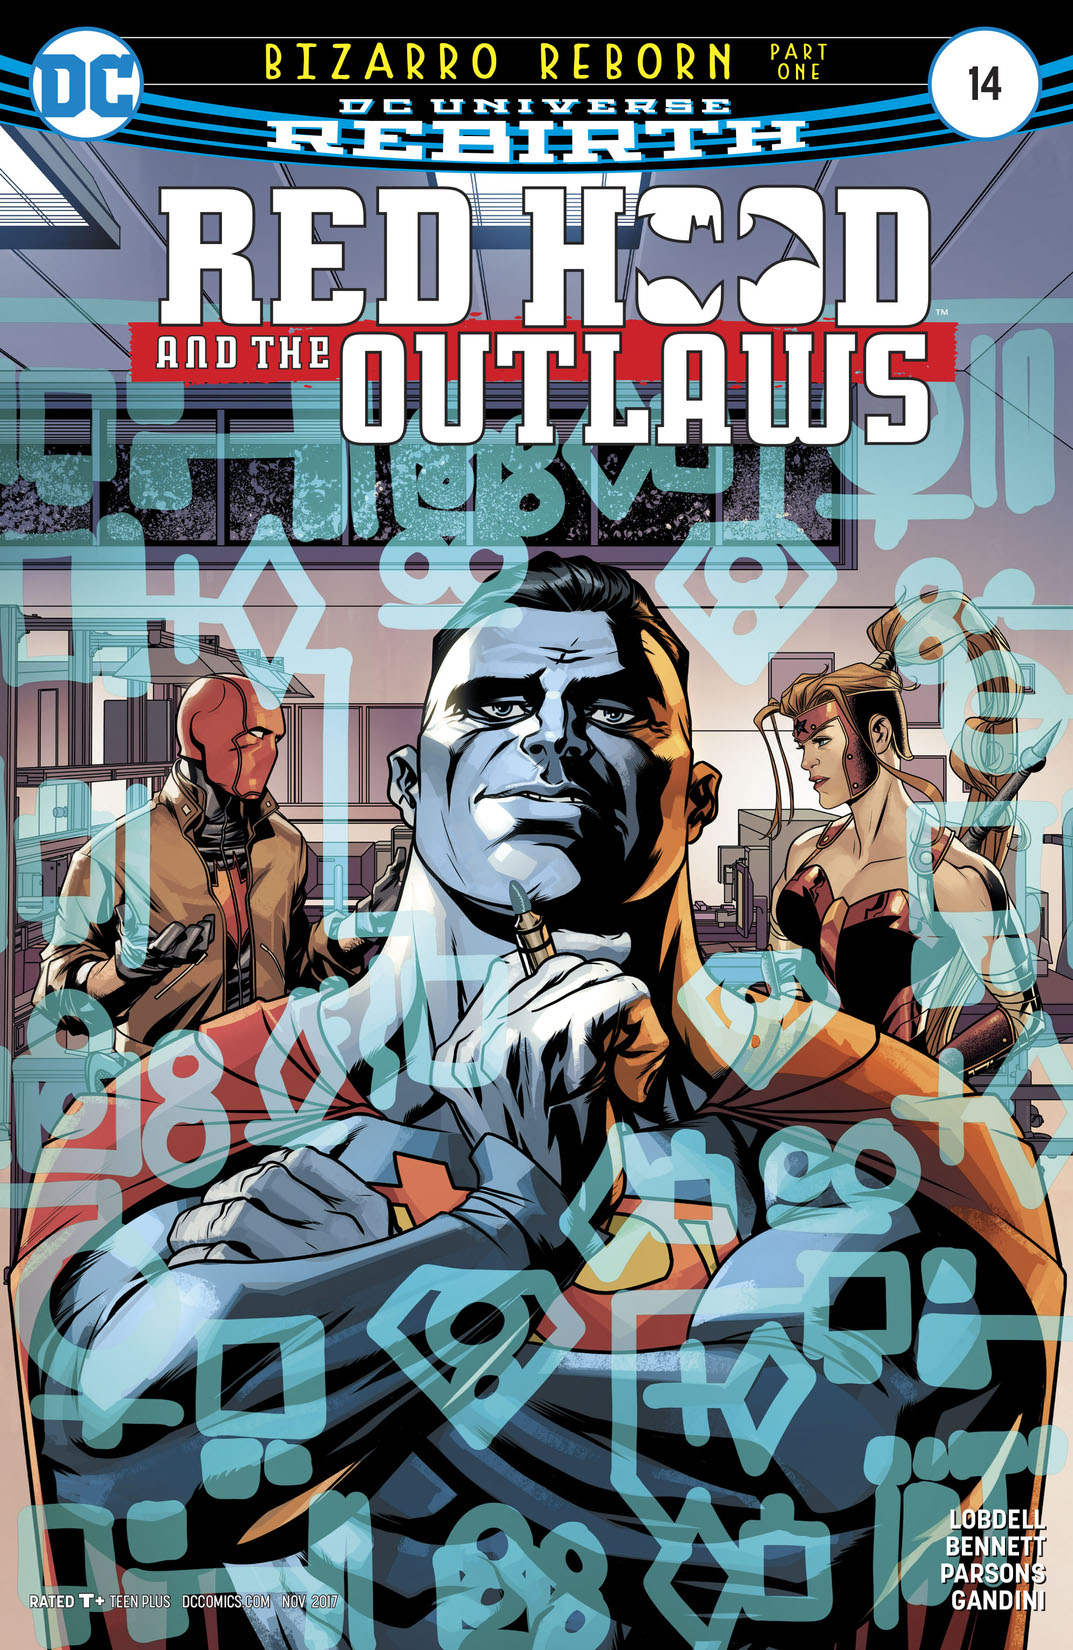 Red Hood and the Outlaws (2016-) #14 preview images